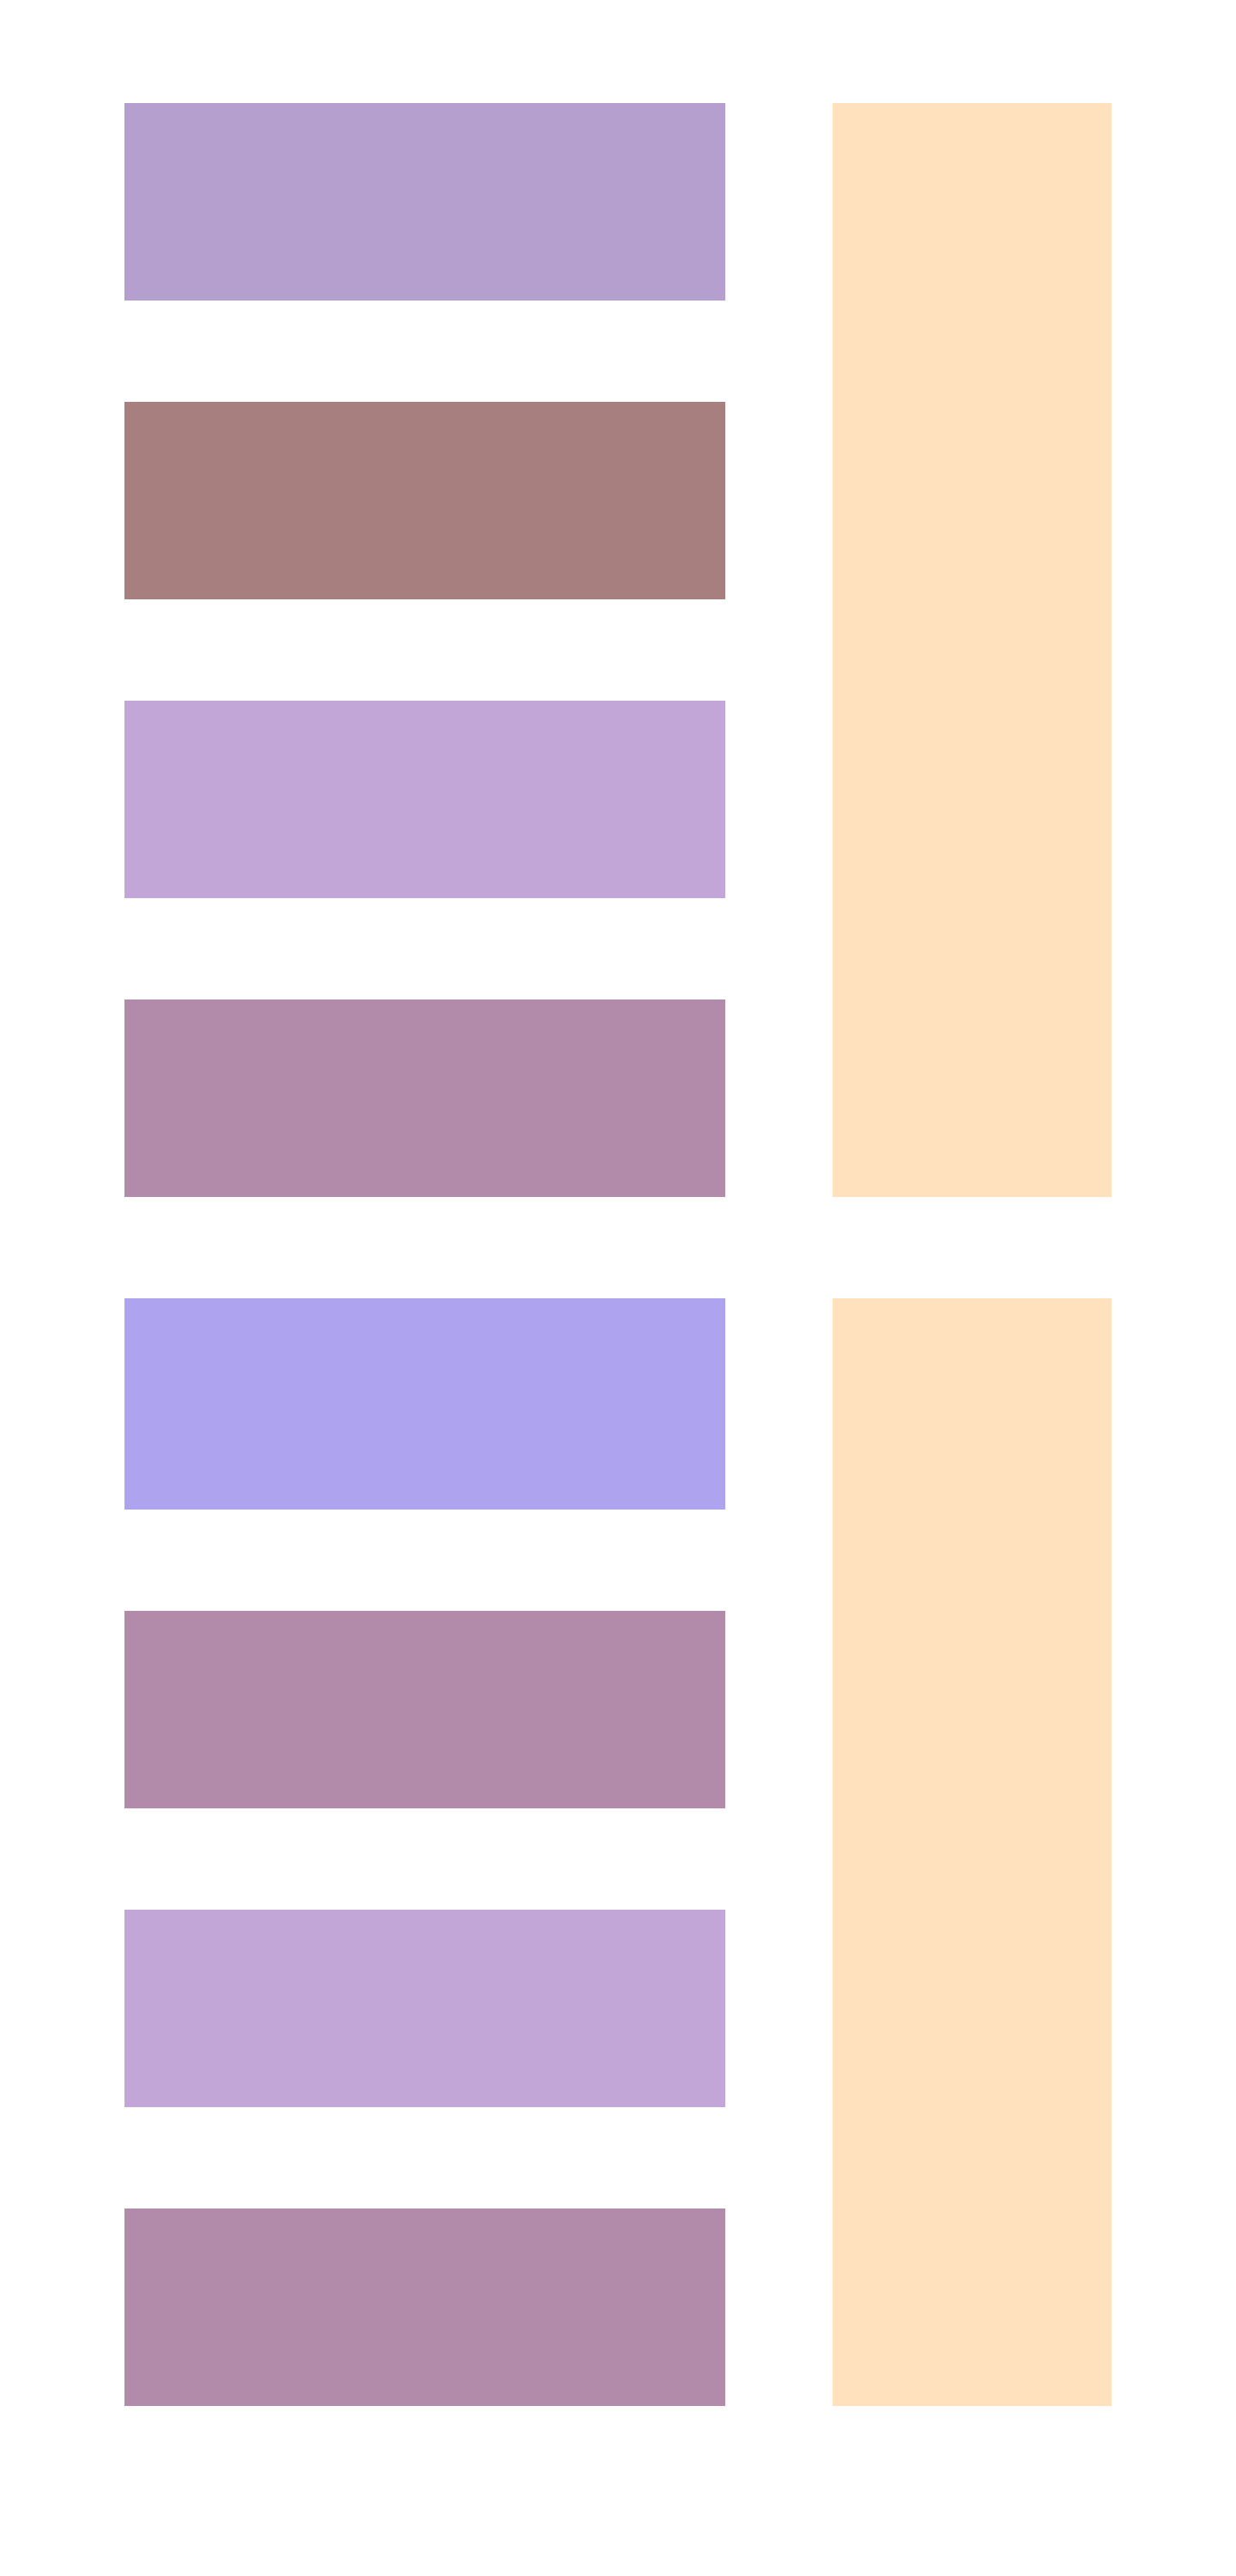 purple, brown, and yellow rectangles on a grid